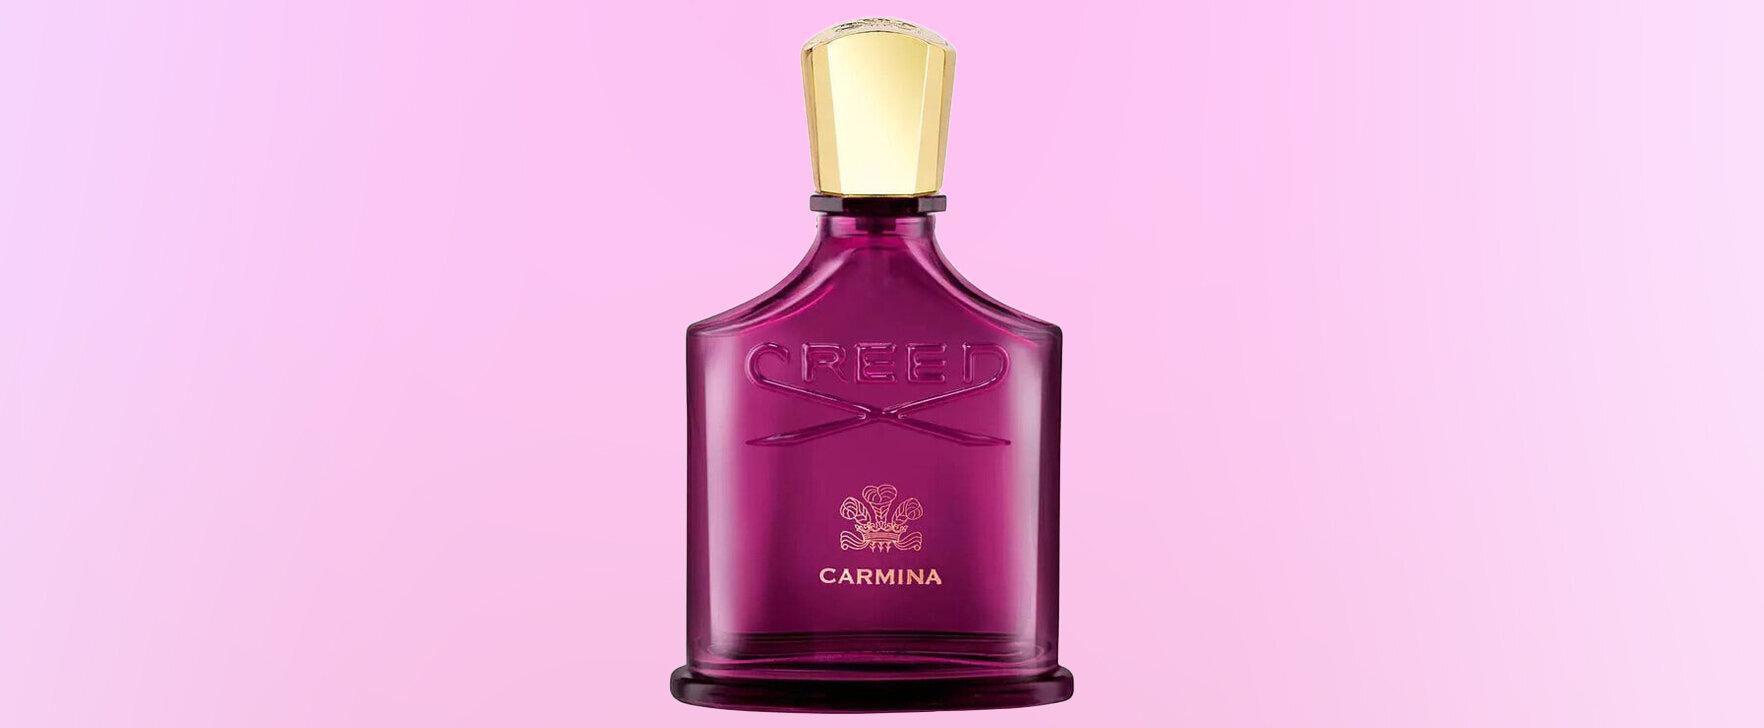 Carmina by Creed: A Floral-woody Eau de Parfum That Celebrates the Courage of Women